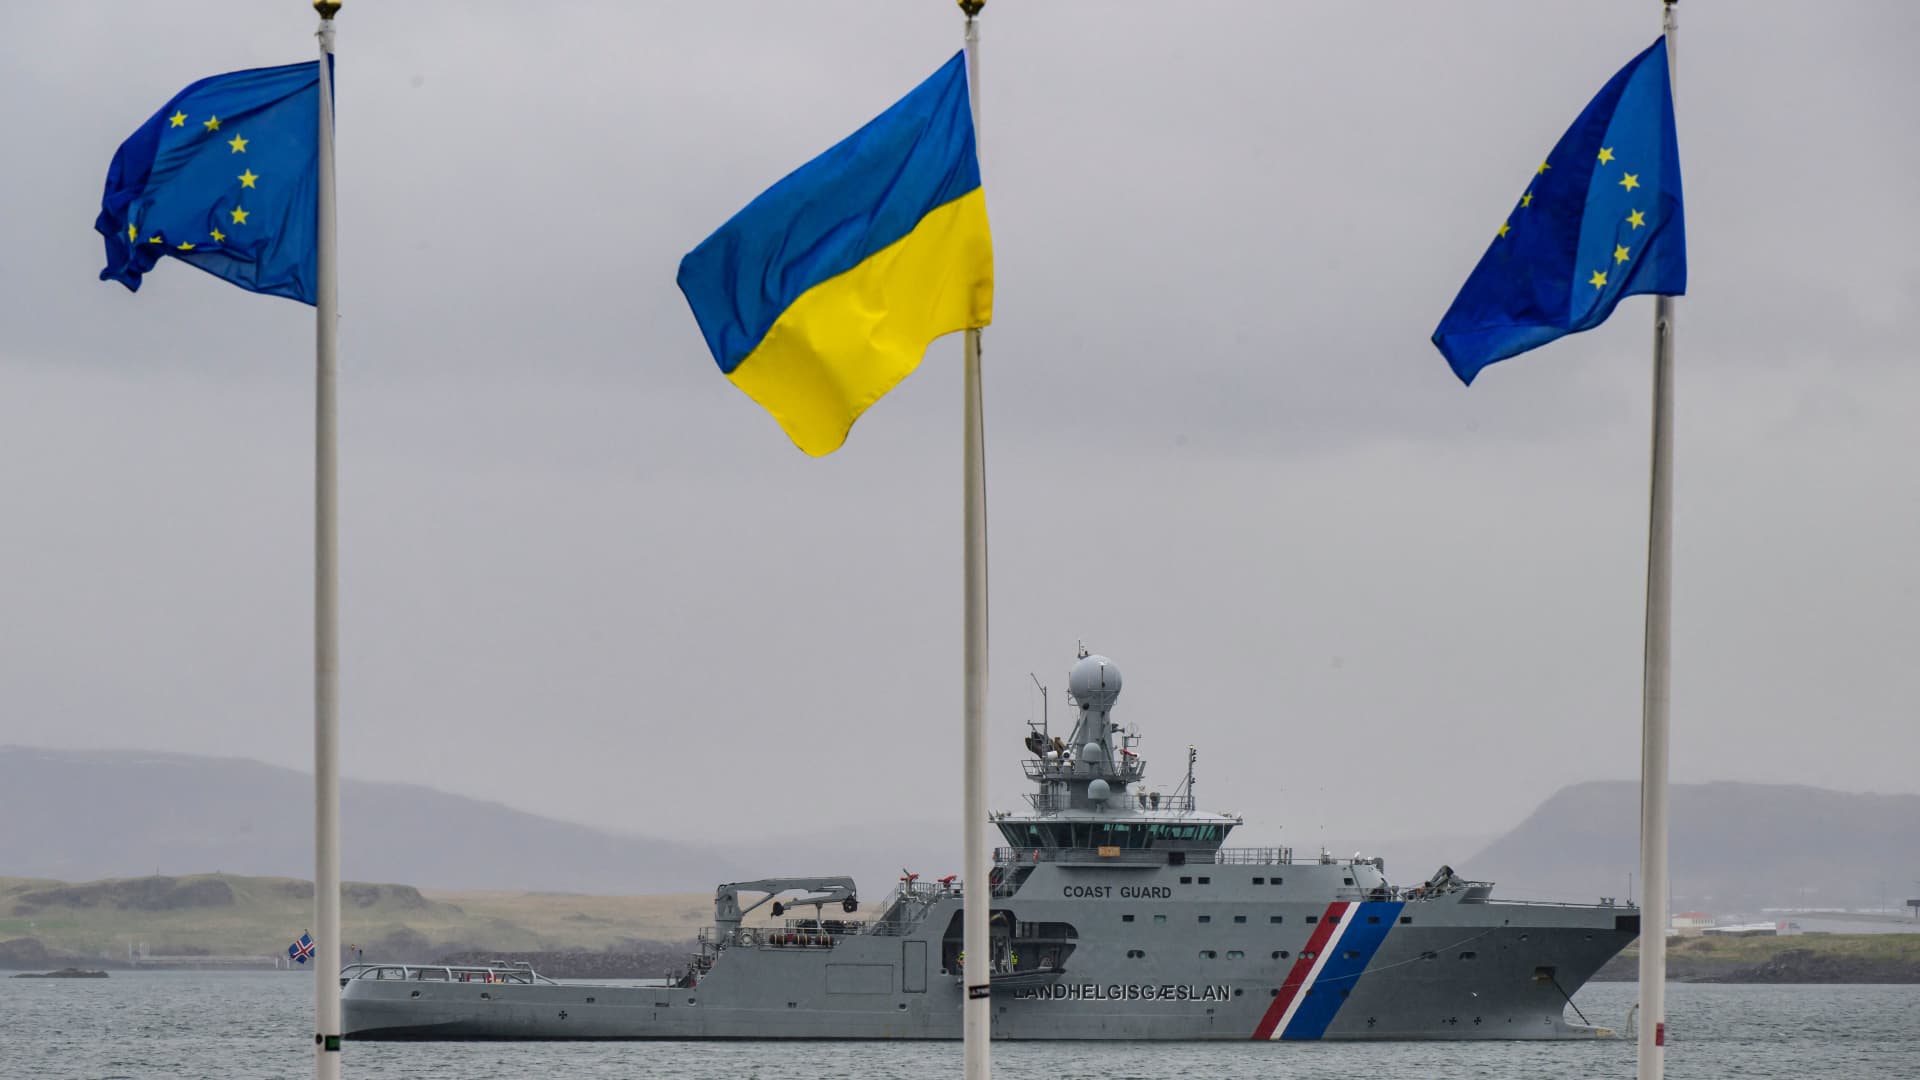 An Icelandic coast guard ship sails in front of EU and Ukraine flags flying in front of the Harpa Concert hall on May 16, 2023 in Reykjavik, Iceland, the venue of the 4th Summit of the Heads of State and Government of the Council of Europe, on the eve of the two-day summit.